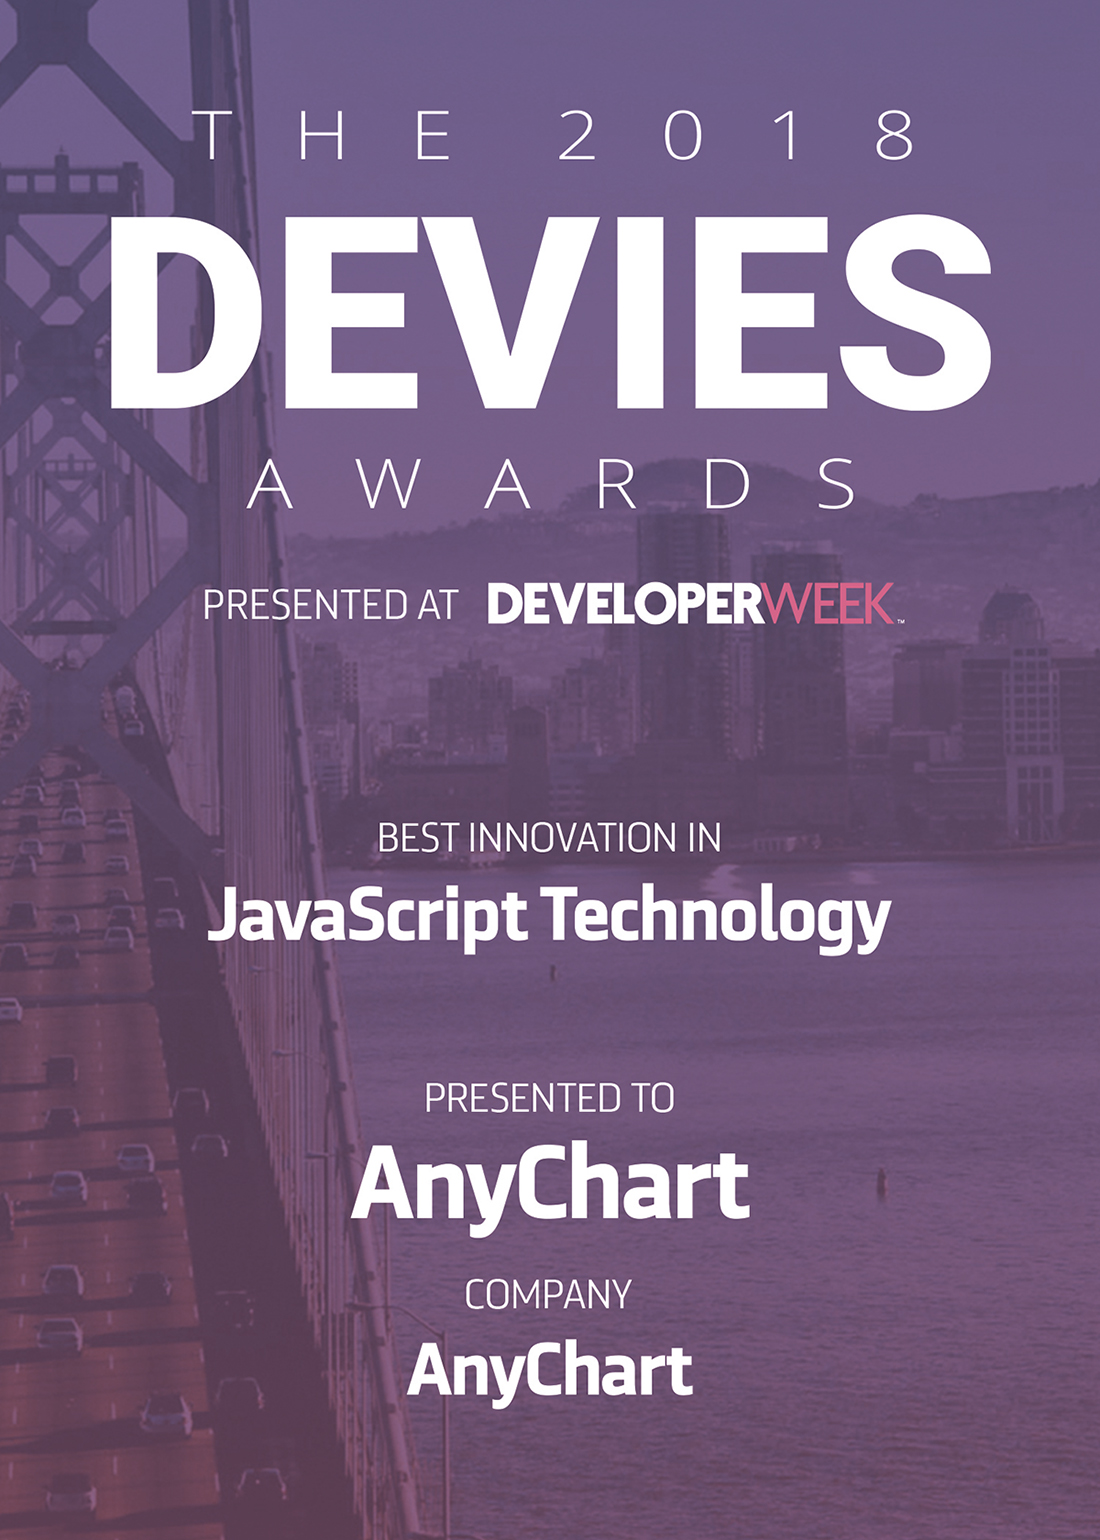 Best in JavaScript Technology for Innovation Is AnyChart JS Charts Library (2018 DEVIES Award Winner)